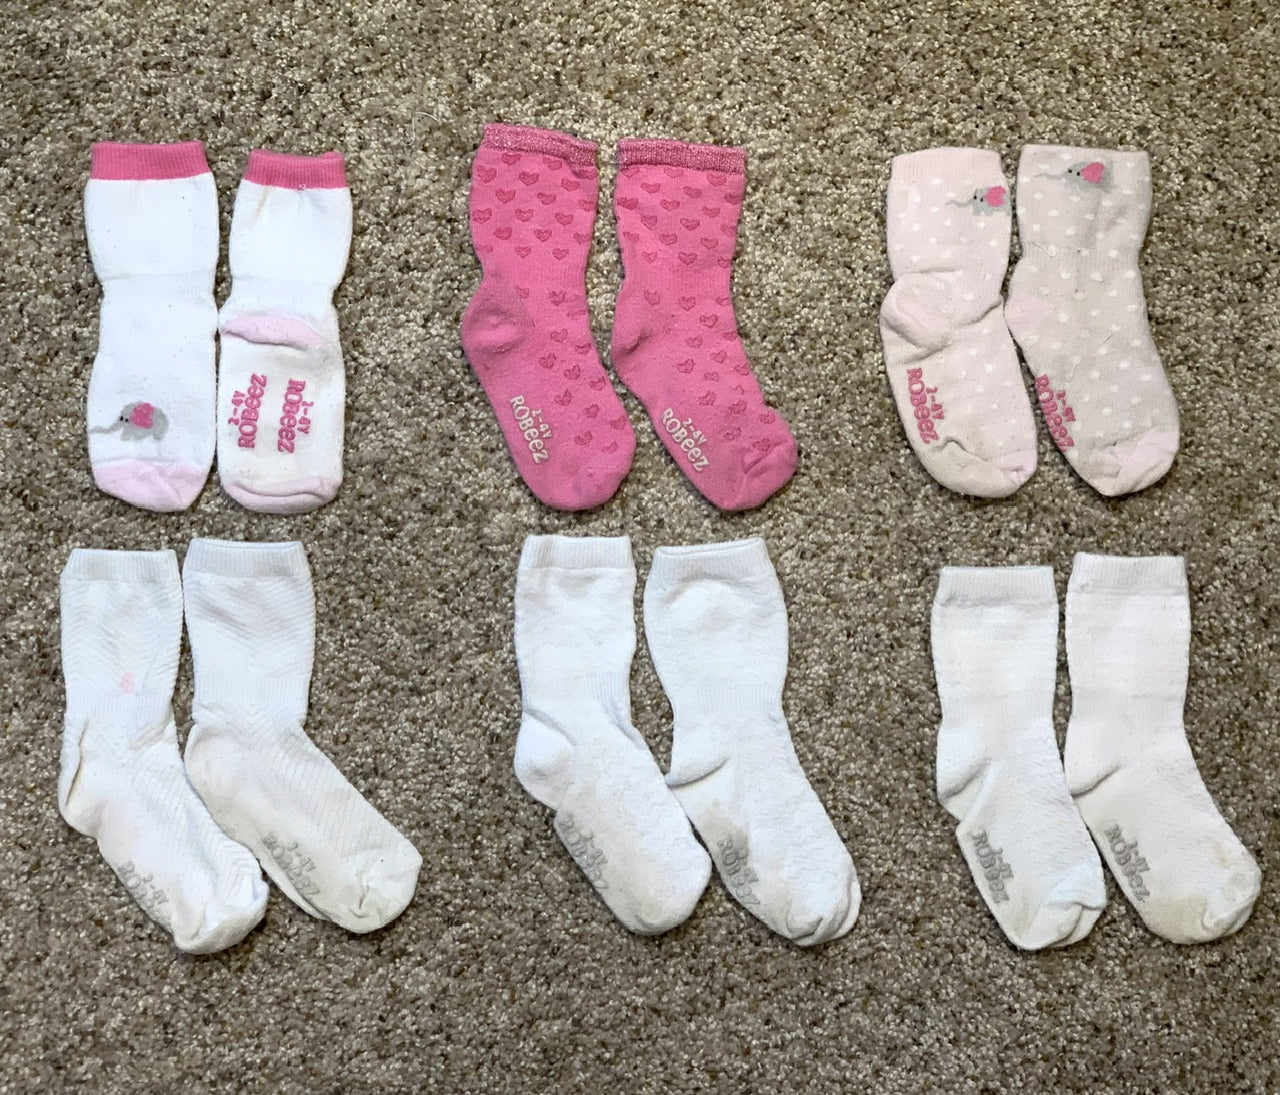 Size 2-4 years ROBEEZ girl’s socks - 6 pink/white pairs